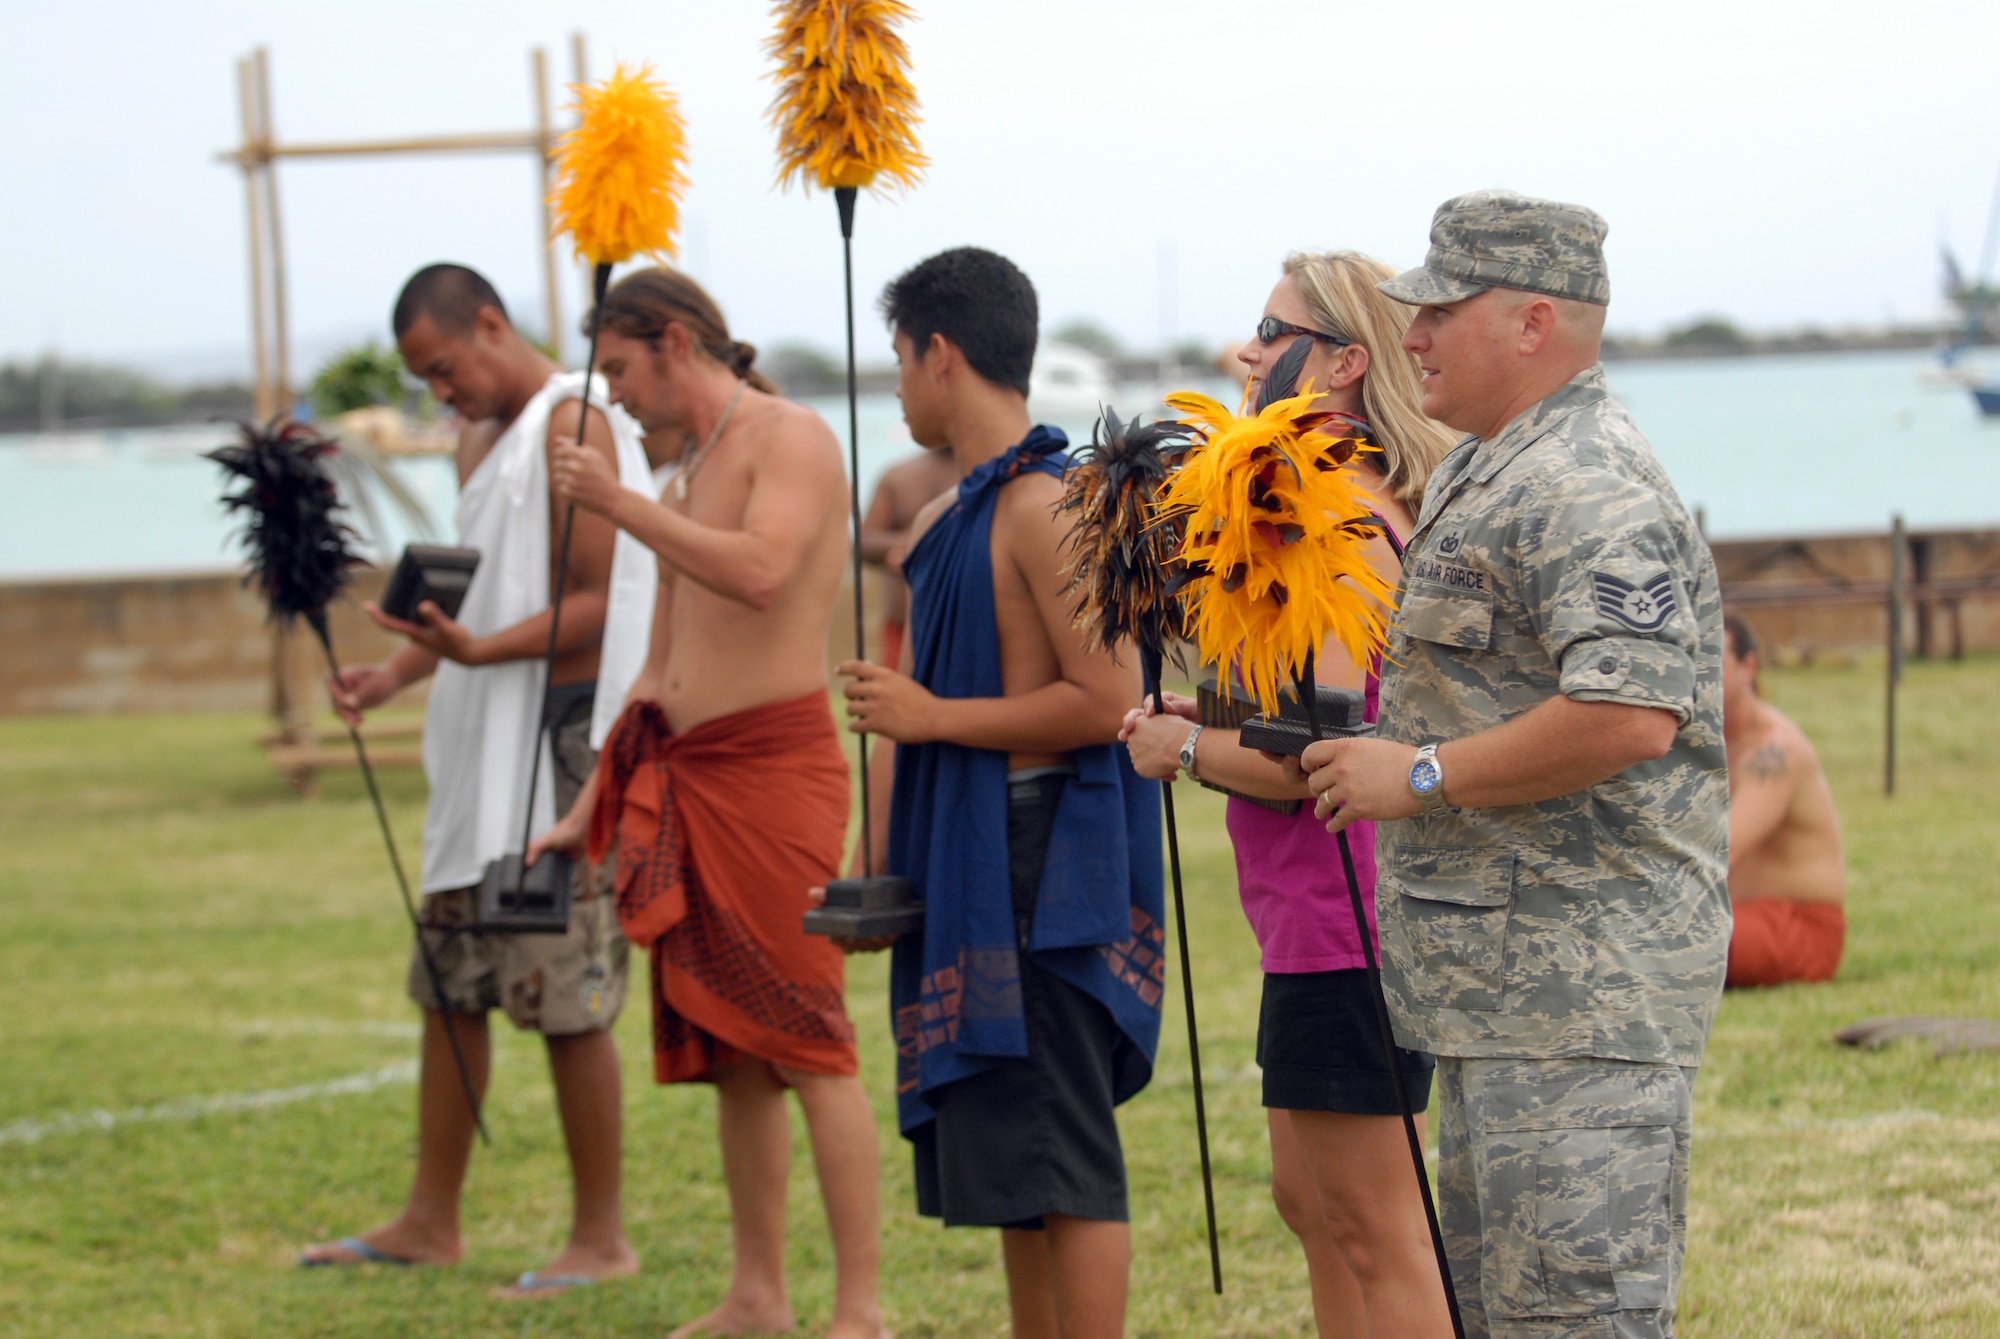 HICKAM AIR FORCE BASE, Hawaii -- Winners of each event recieved a kahili during the Makahiki Festival here, Nov. 14. For more than two-thousand years, the significance of Lono and his contributions to the beliefs and practices of the early Hawaiian people, influenced the celebration of events held during the Makahiki Festival throughout the Hawaiian Islands. Since Lono was the embodiment of all the characteristics of peace and welfare, all warfare was strictly forbidden during the time of the Makahiki. Since Lono represented the spiritual life-force that came out of all agricultural efforts, much feasting of every kind was done during the four months of the Makahiki. This focus on health and welfare made games of skill that tested a healthy body and mind a focal point of the Makahiki games. (U.S. Air Force photo/Senior Airman Gustavo Gonzalez)